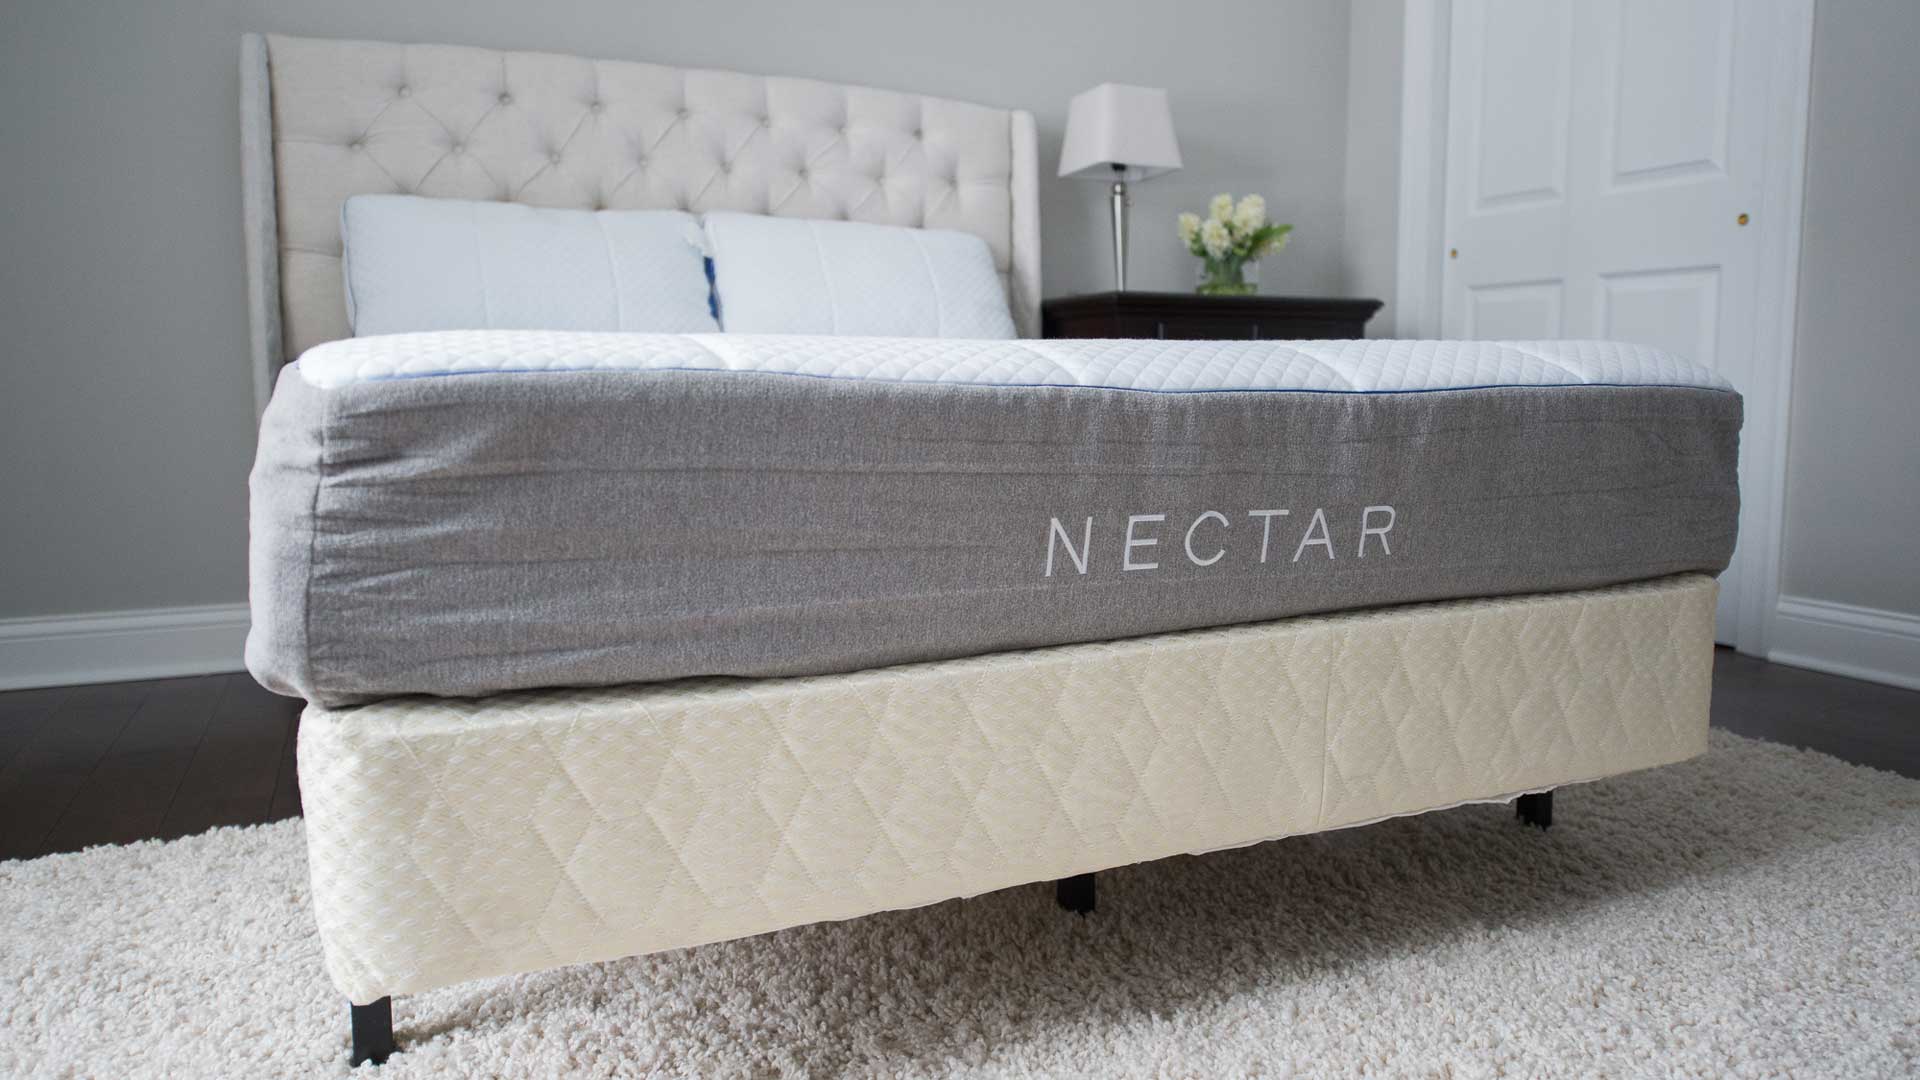 Where To Try a Mattress